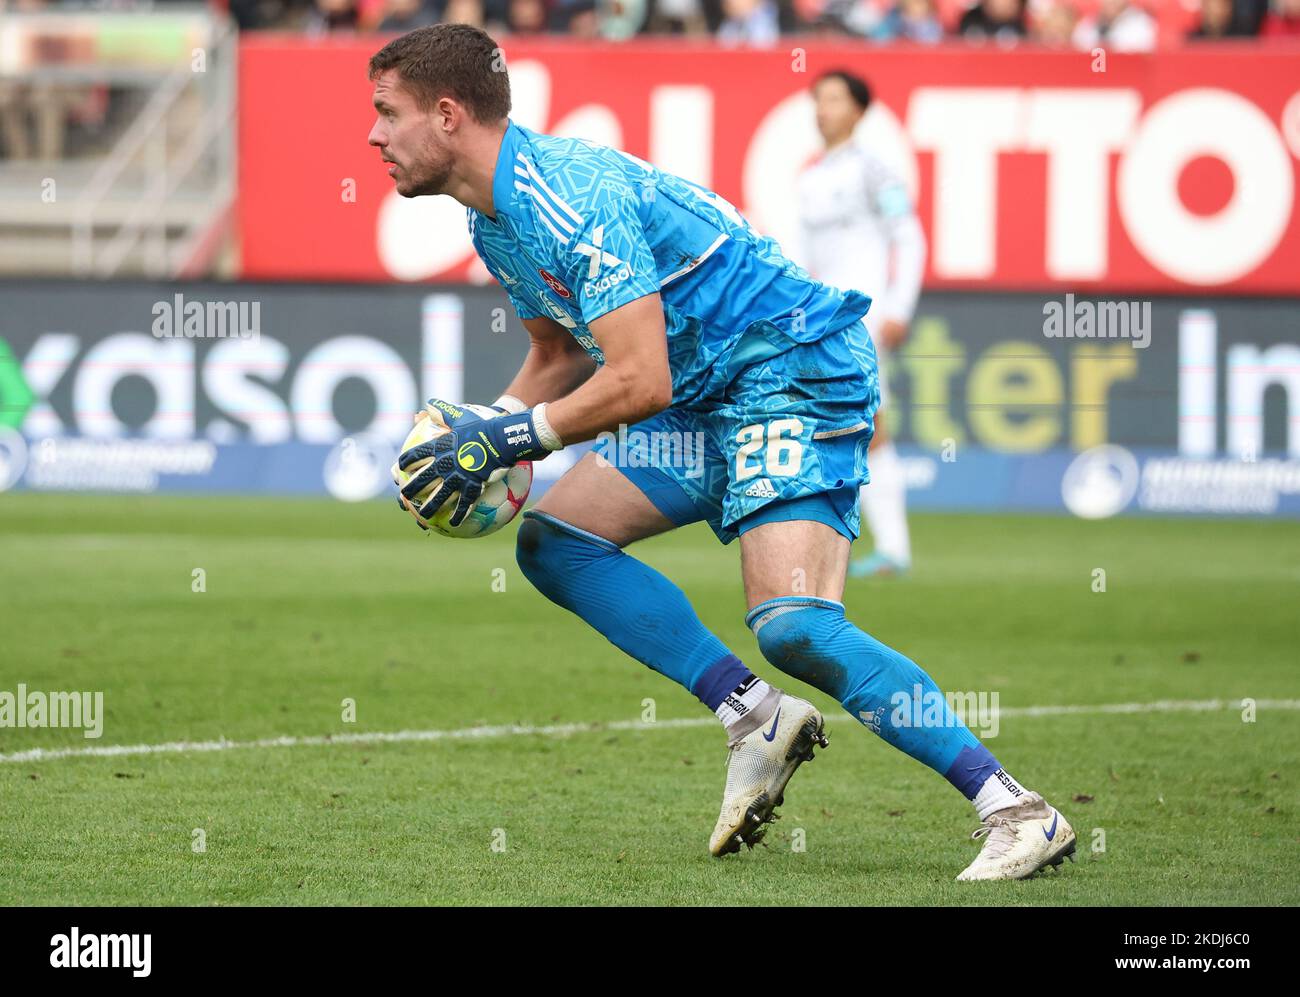 Nuremberg, Germany. 06th Nov, 2022. Soccer: 2nd Bundesliga, 1. FC Nuremberg - 1. FC Magdeburg, Matchday 15 at Max Morlock Stadium. Nuremberg goalkeeper Christian Mathenia in action. Credit: Daniel Karmann/dpa - IMPORTANT NOTE: In accordance with the requirements of the DFL Deutsche Fußball Liga and the DFB Deutscher Fußball-Bund, it is prohibited to use or have used photographs taken in the stadium and/or of the match in the form of sequence pictures and/or video-like photo series./dpa/Alamy Live News Stock Photo